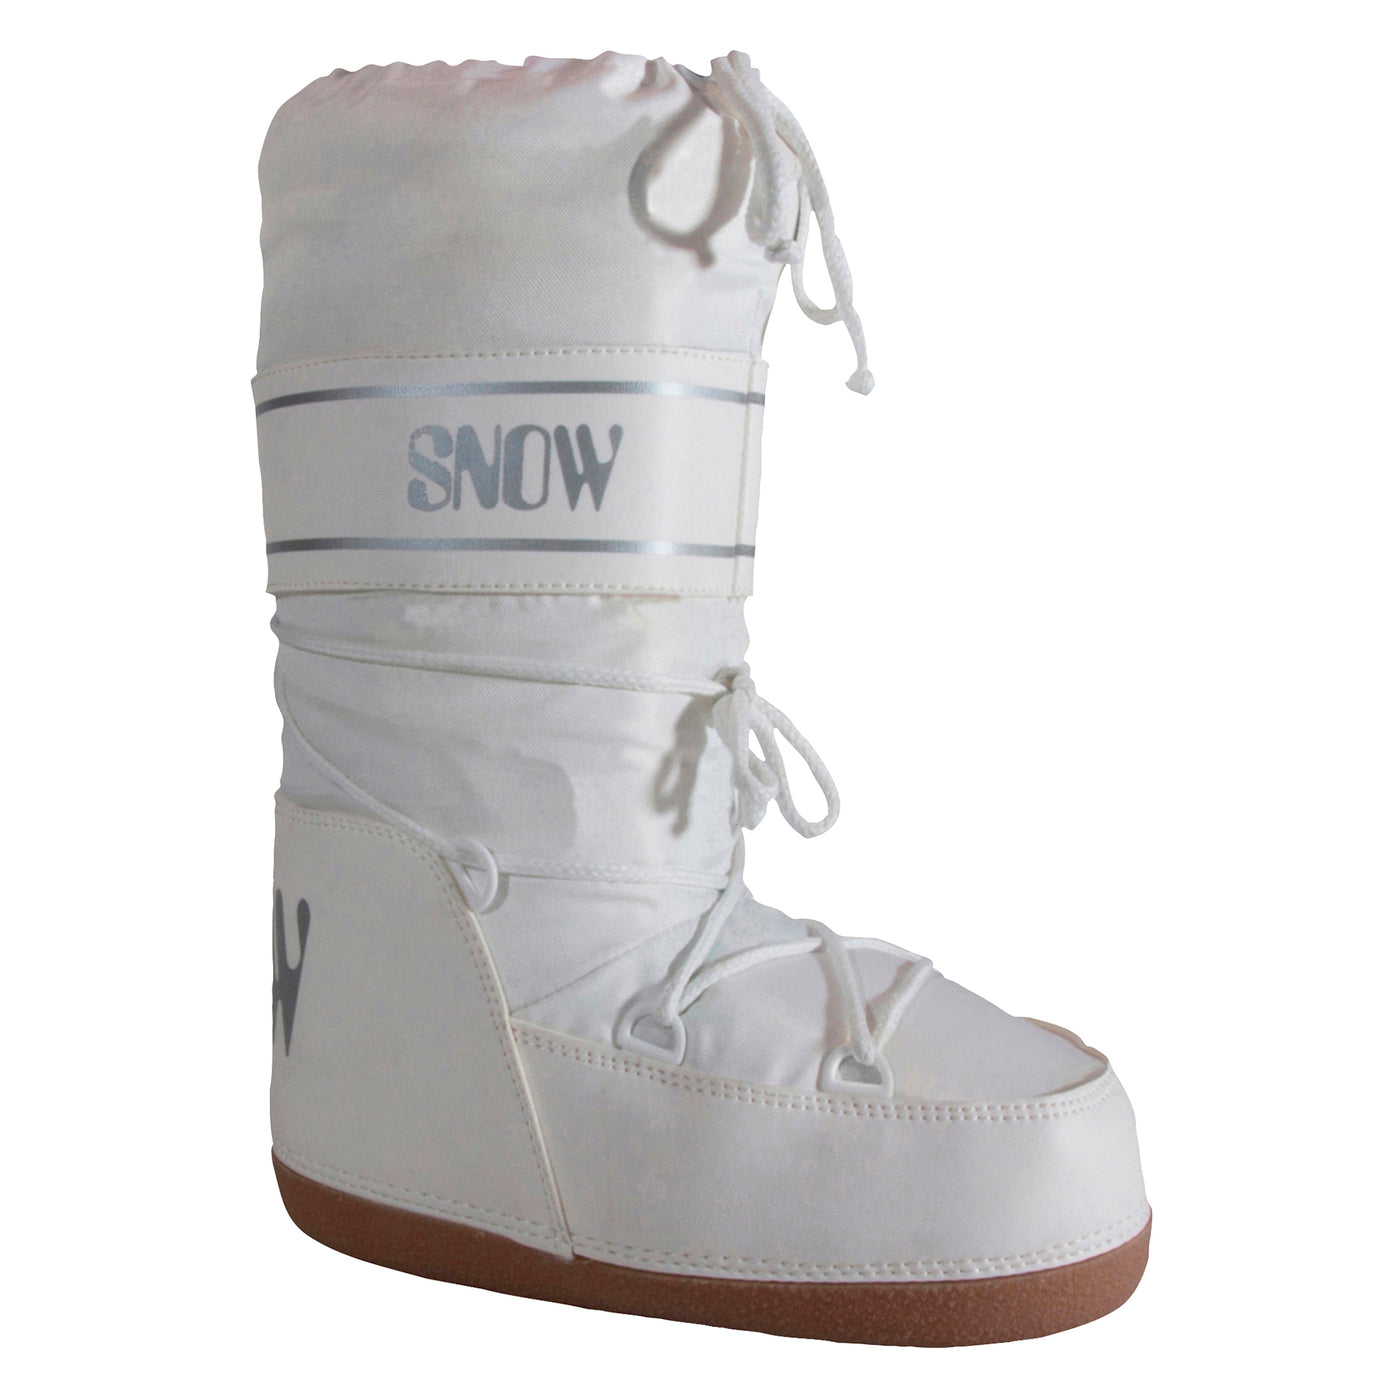 Manbi Adult Snow Boot White - DISCONTINUED